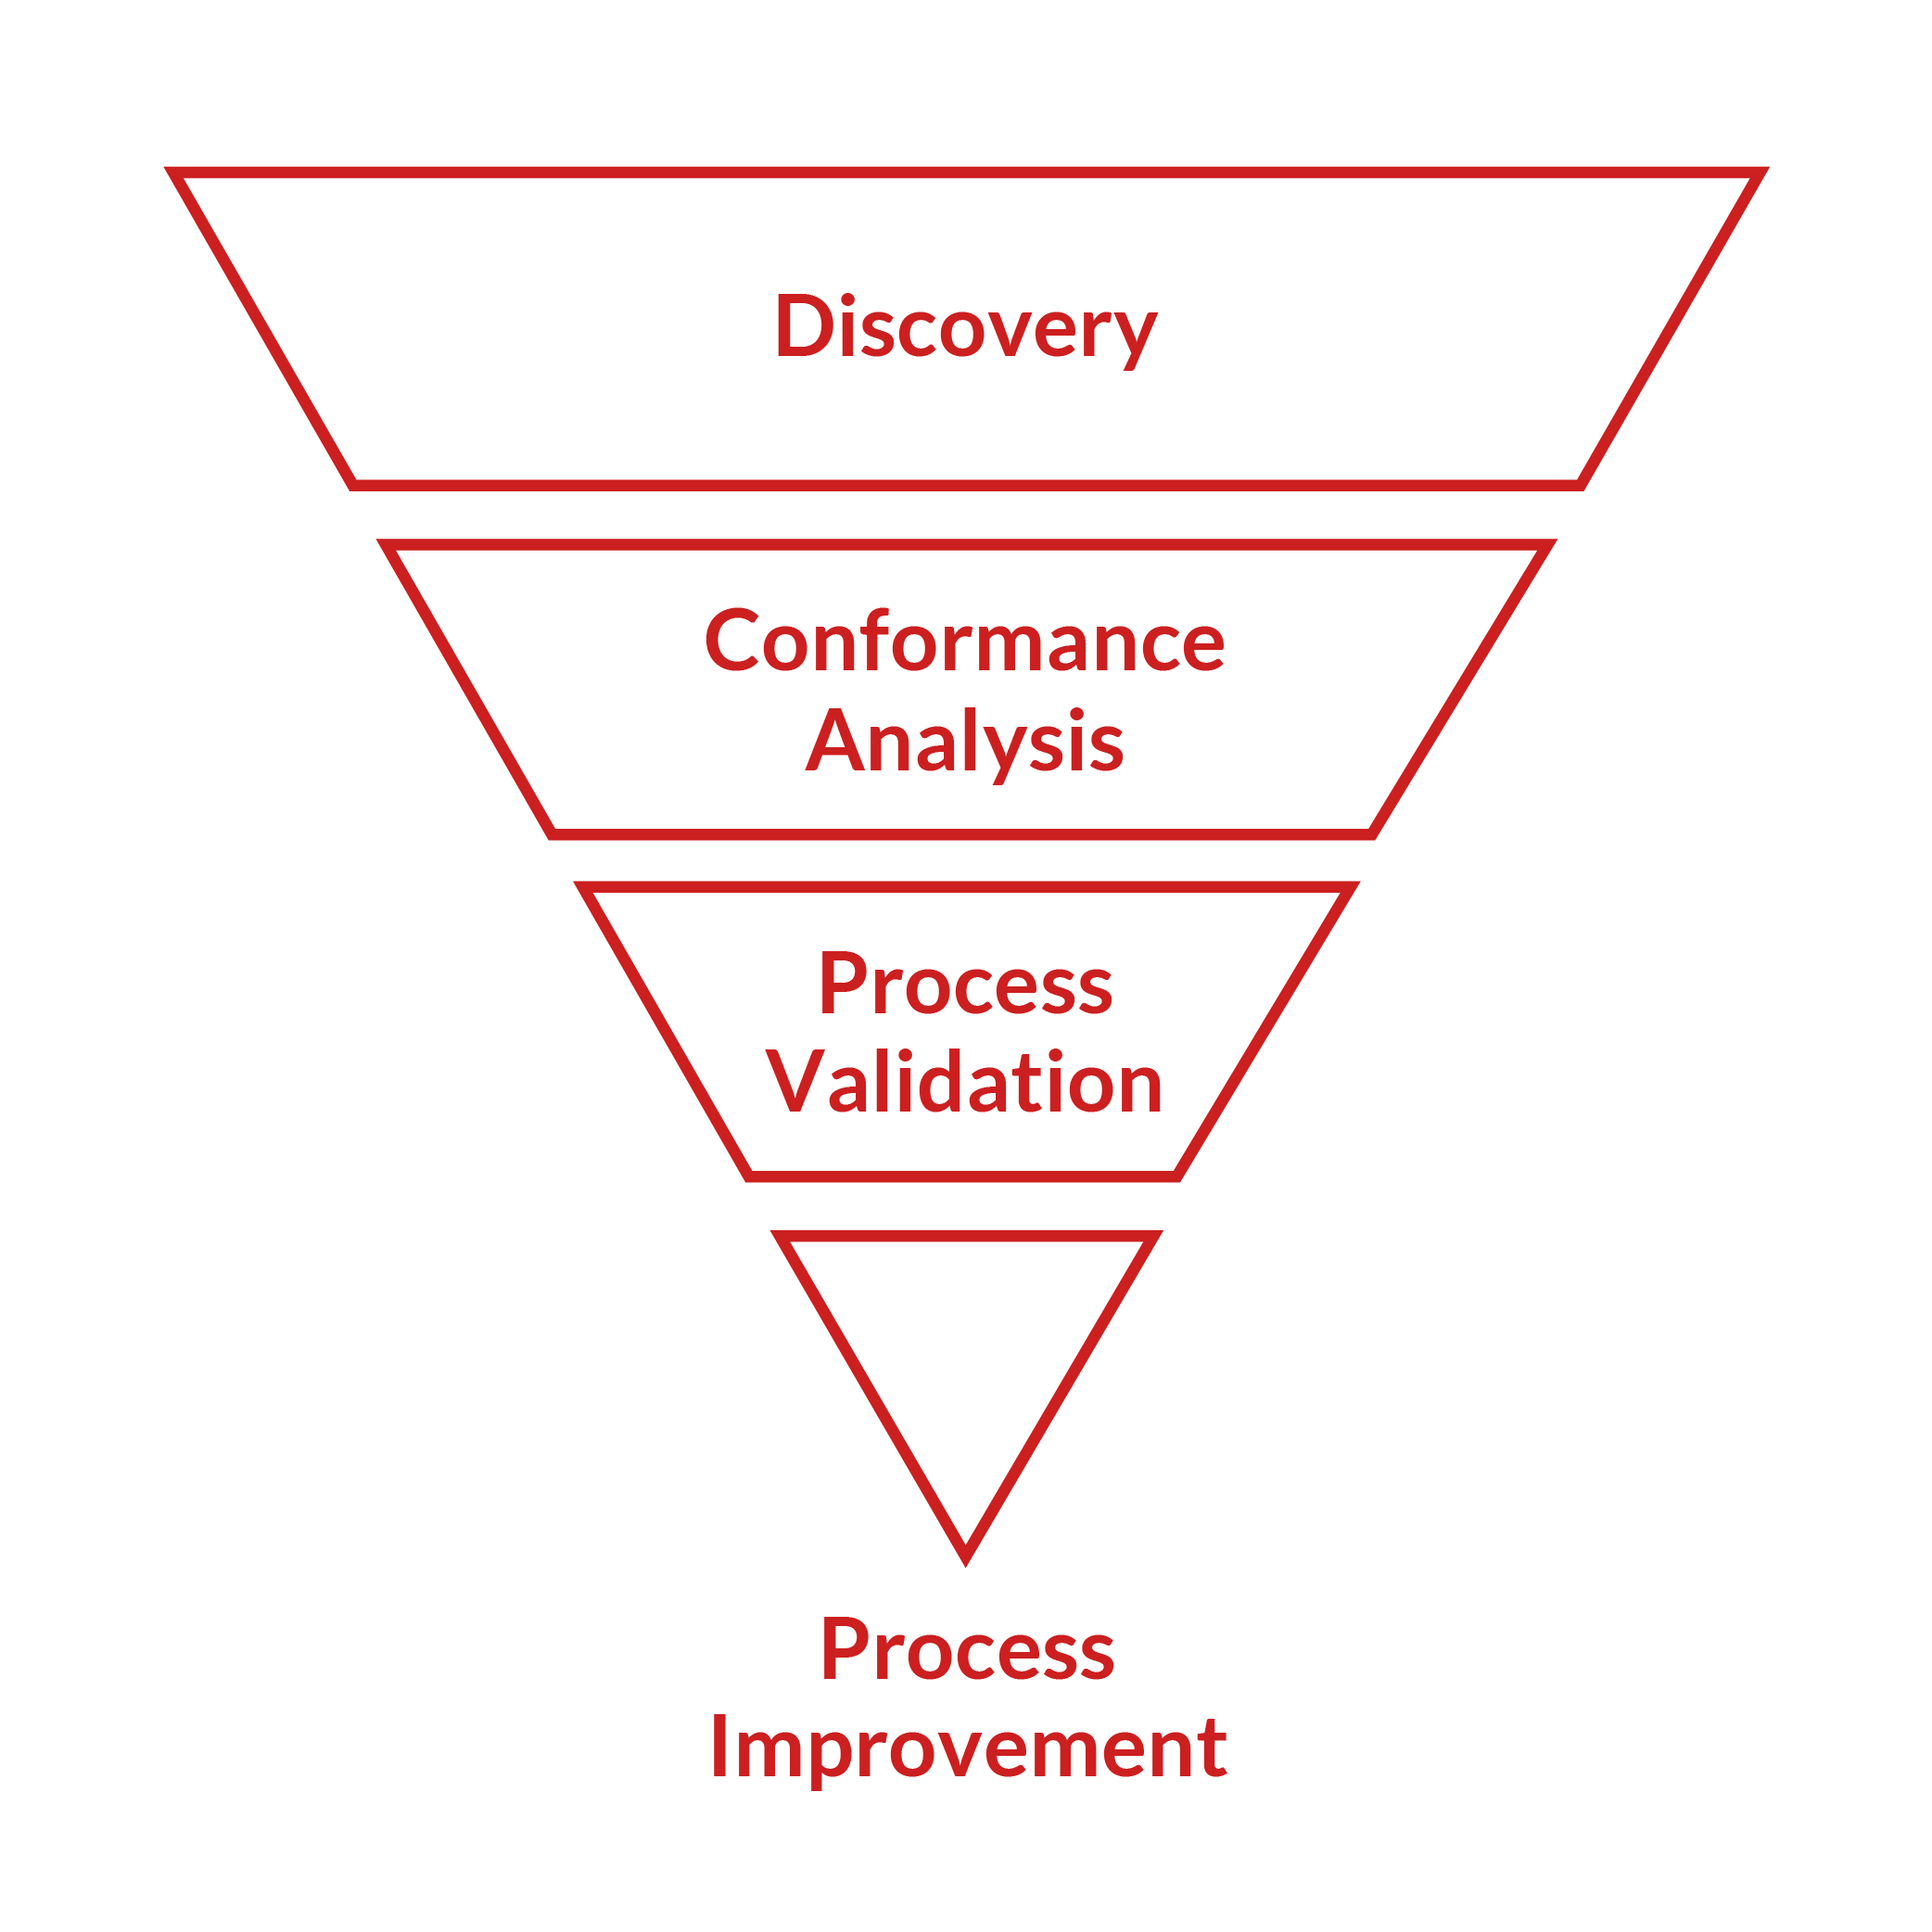 Discovery, Conformance Analysis, Process Validation, and Process Improvement